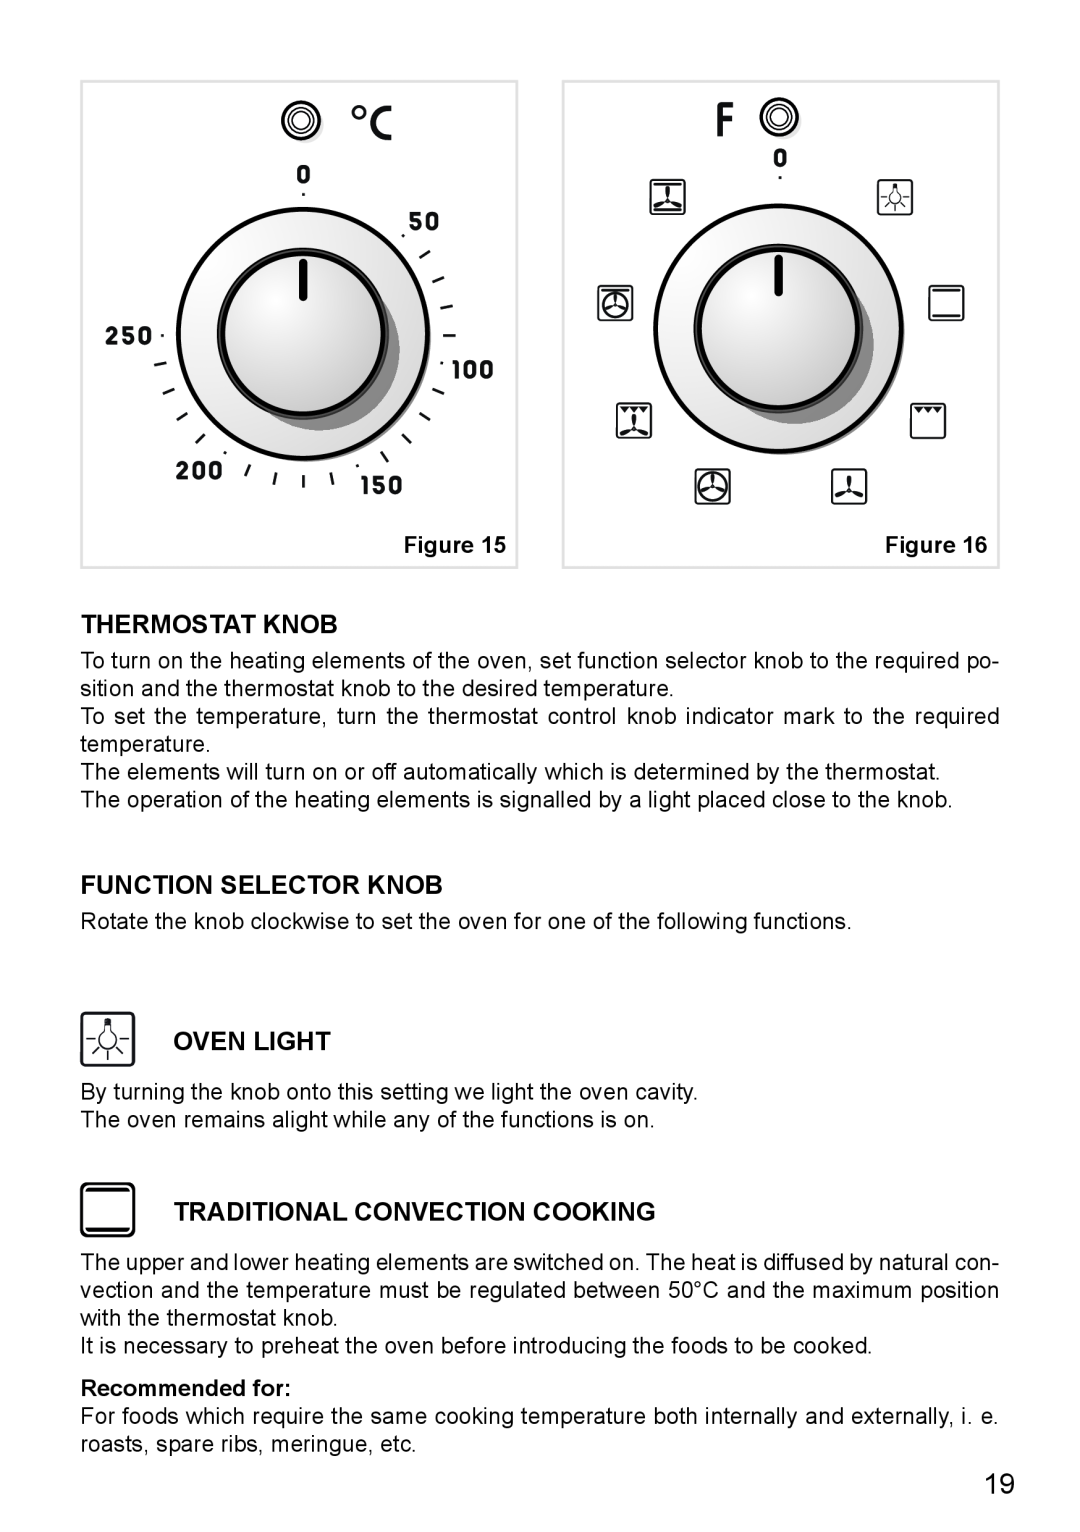 DeLonghi DE608MLH Thermostat Knob, Function Selector Knob, Oven Light, Traditional Convection Cooking, Recommended for 